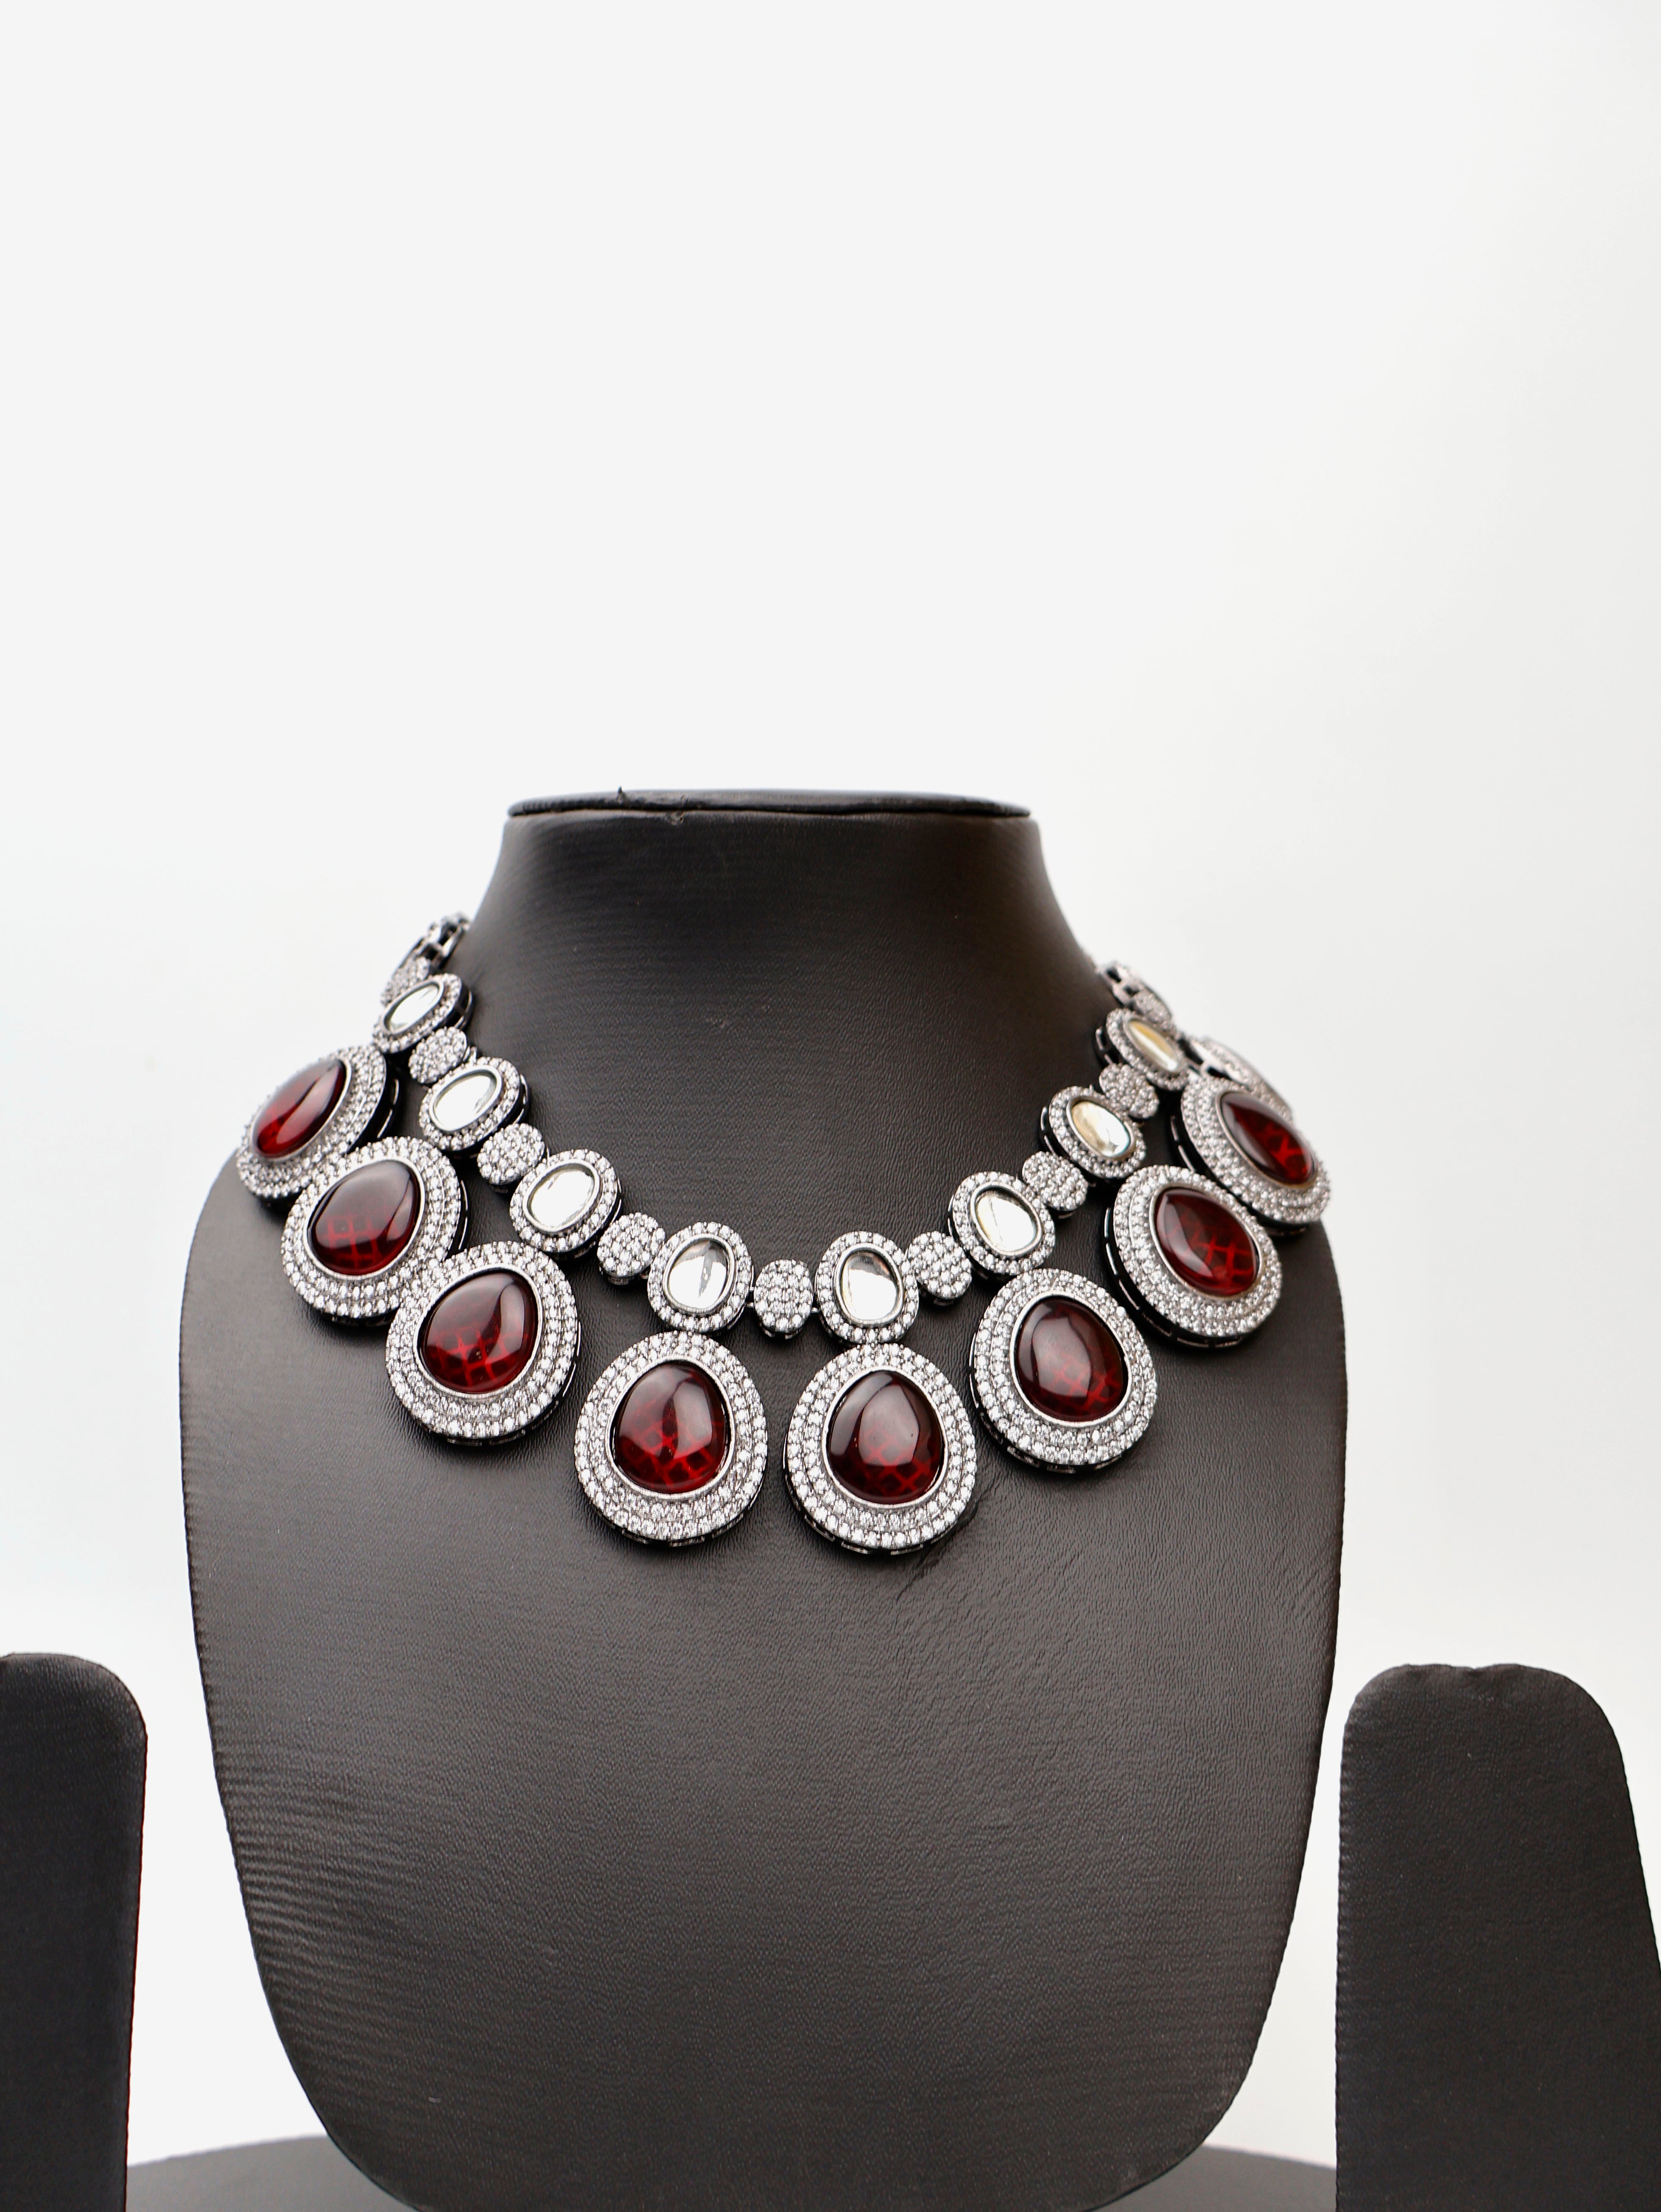 Pyrope Garnet Stone Reverse AD High Quality Necklace Set Fashion Jewelry for Party Festival Wedding Occasion in Noida